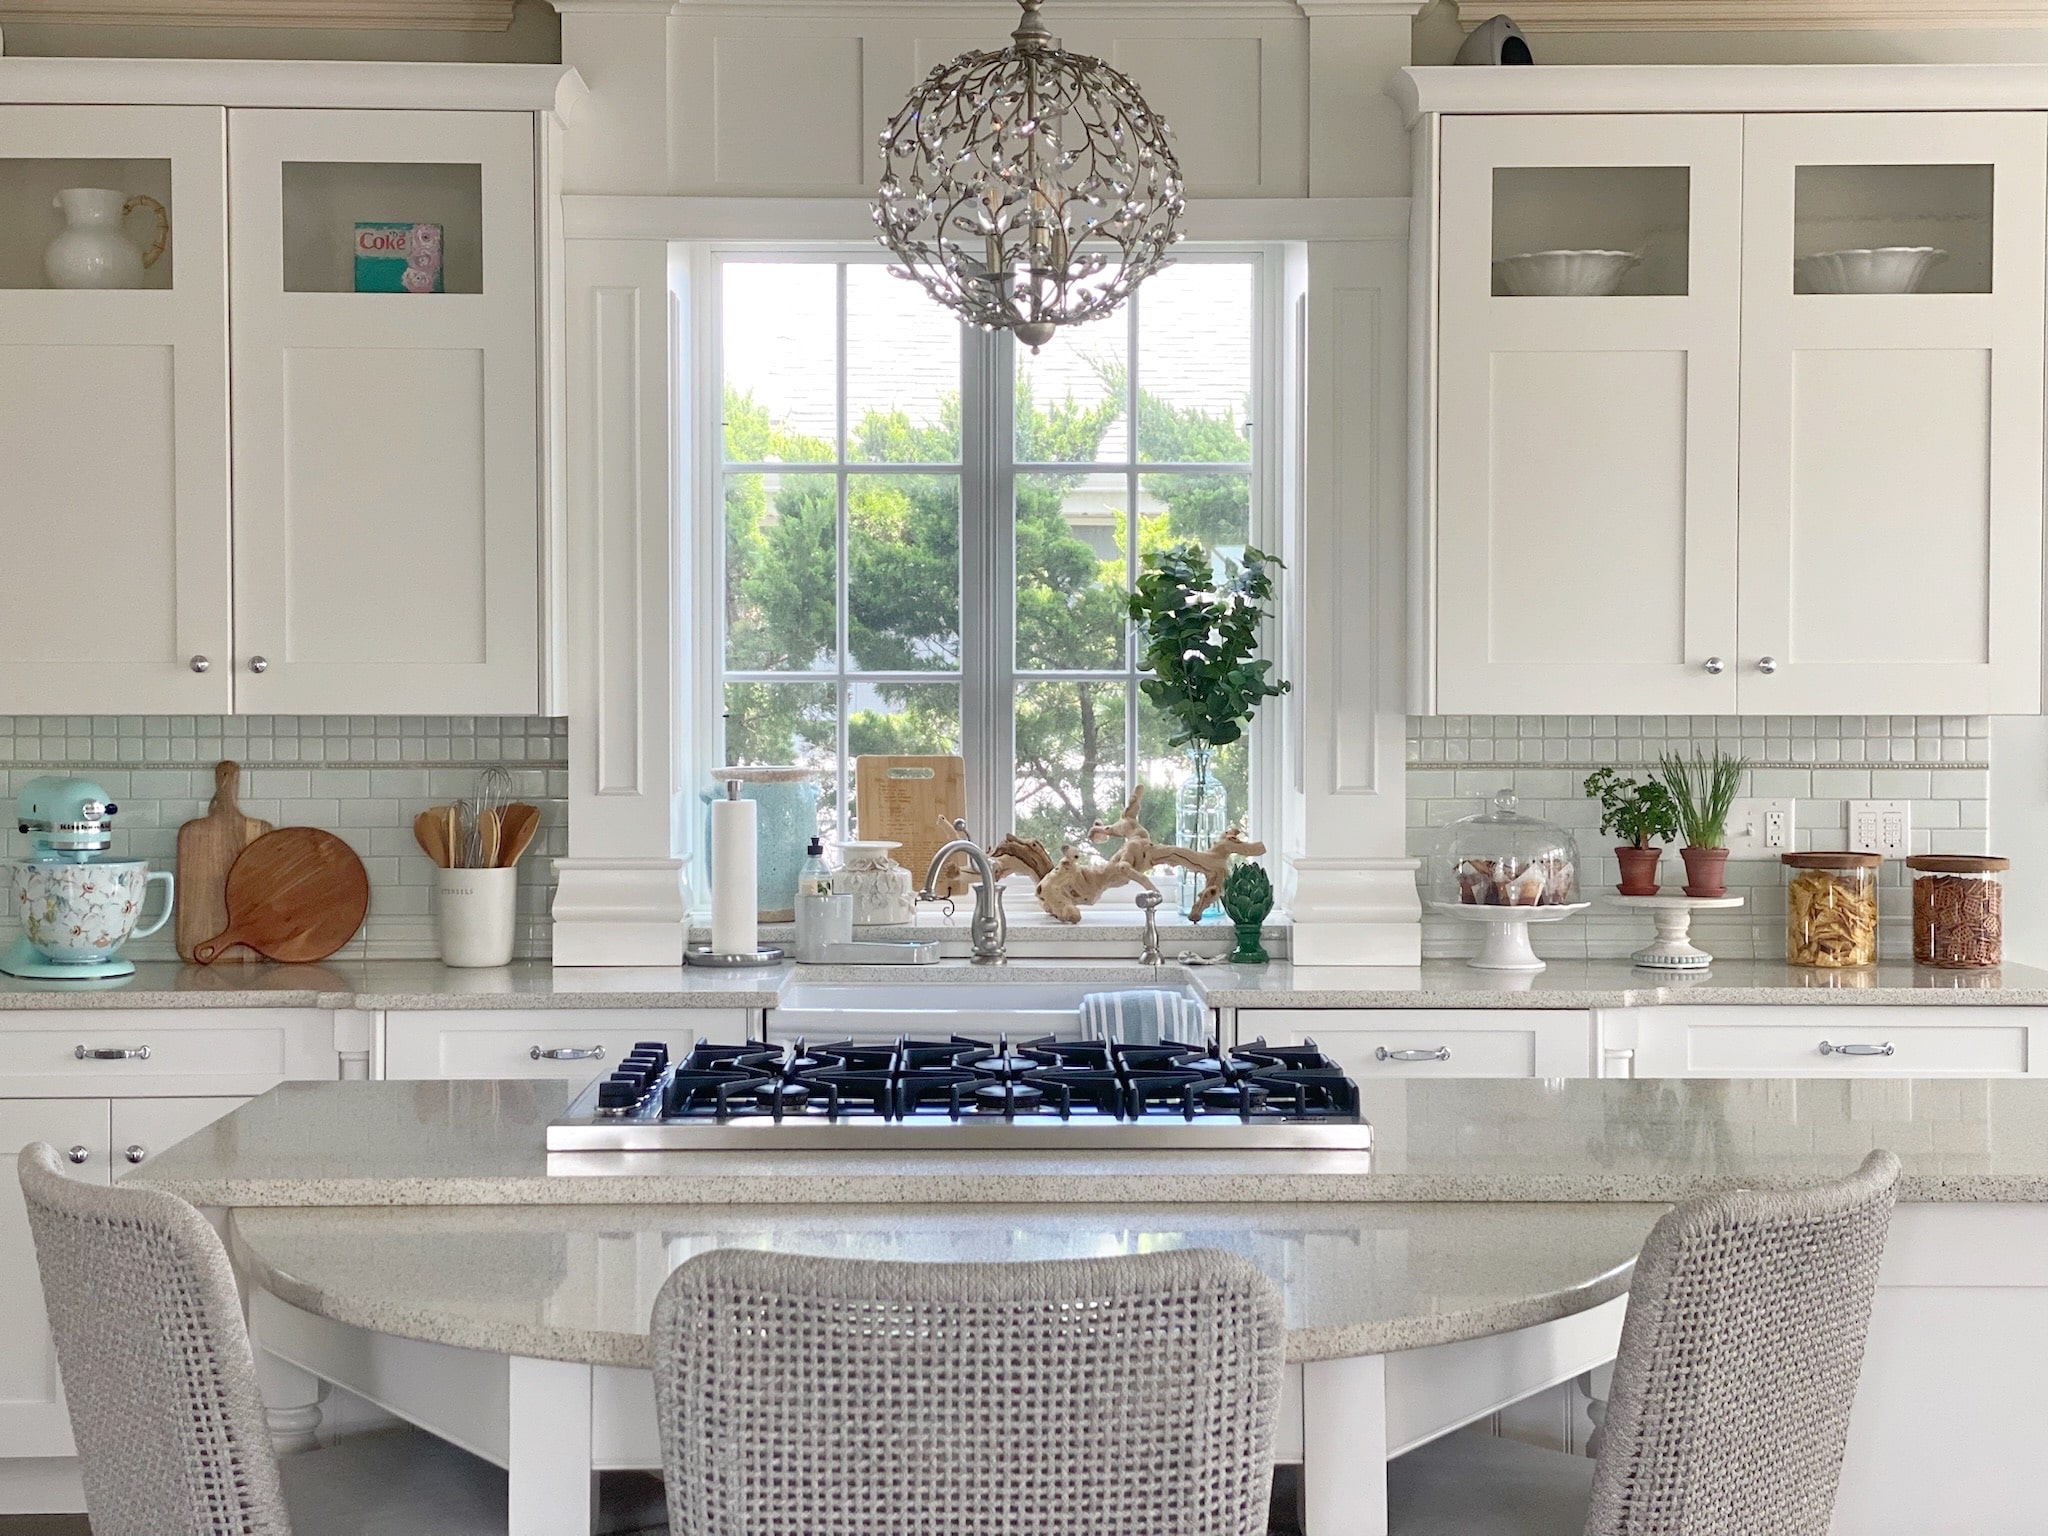 An interior design with white cabinets and a center island.